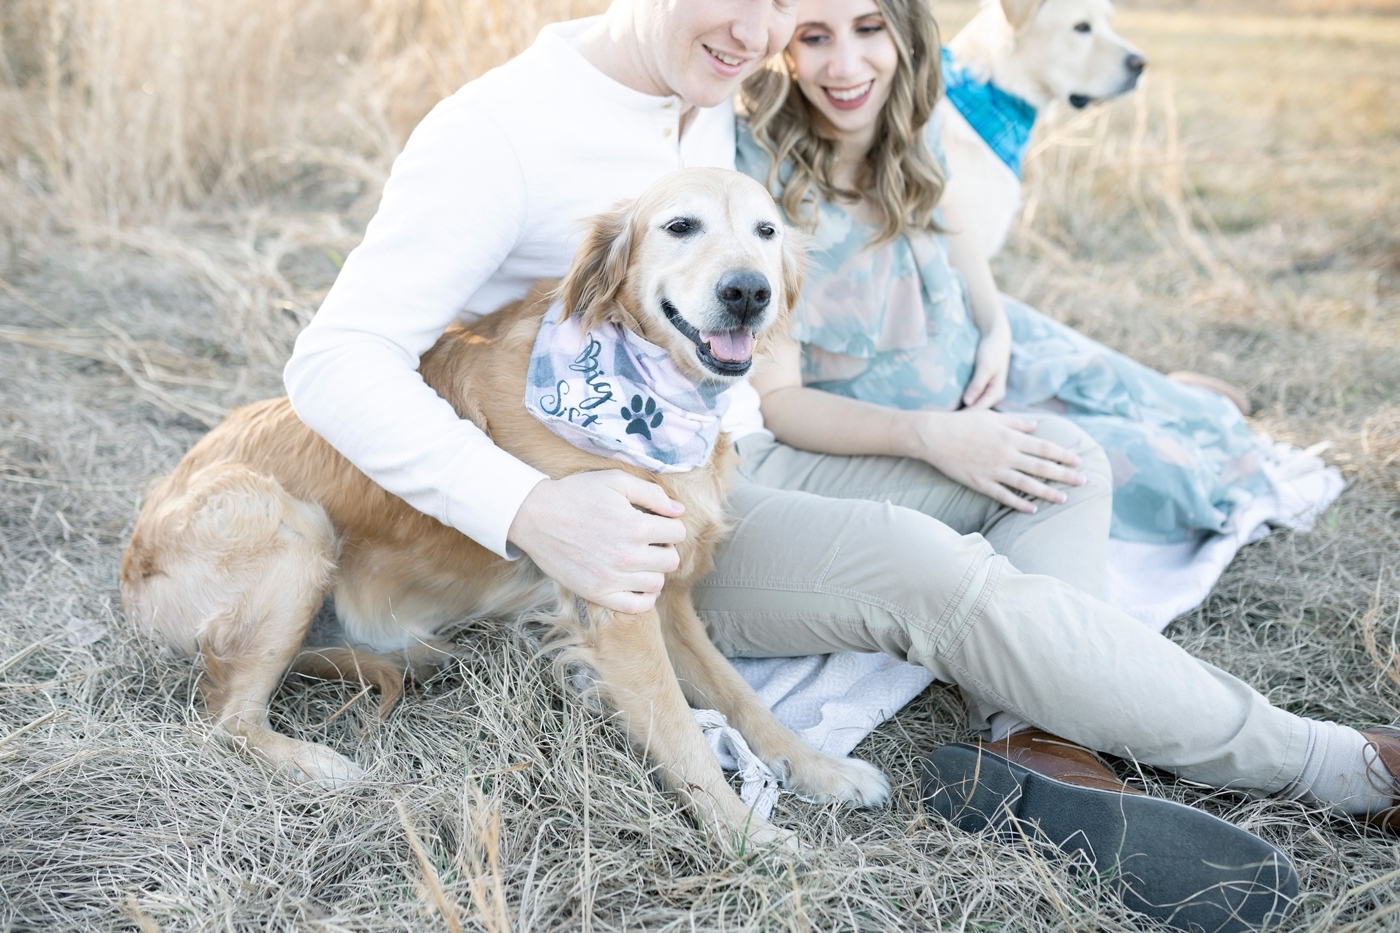 Maternity photoshoot with family dogs. Photo by Little Sunshine Photography.